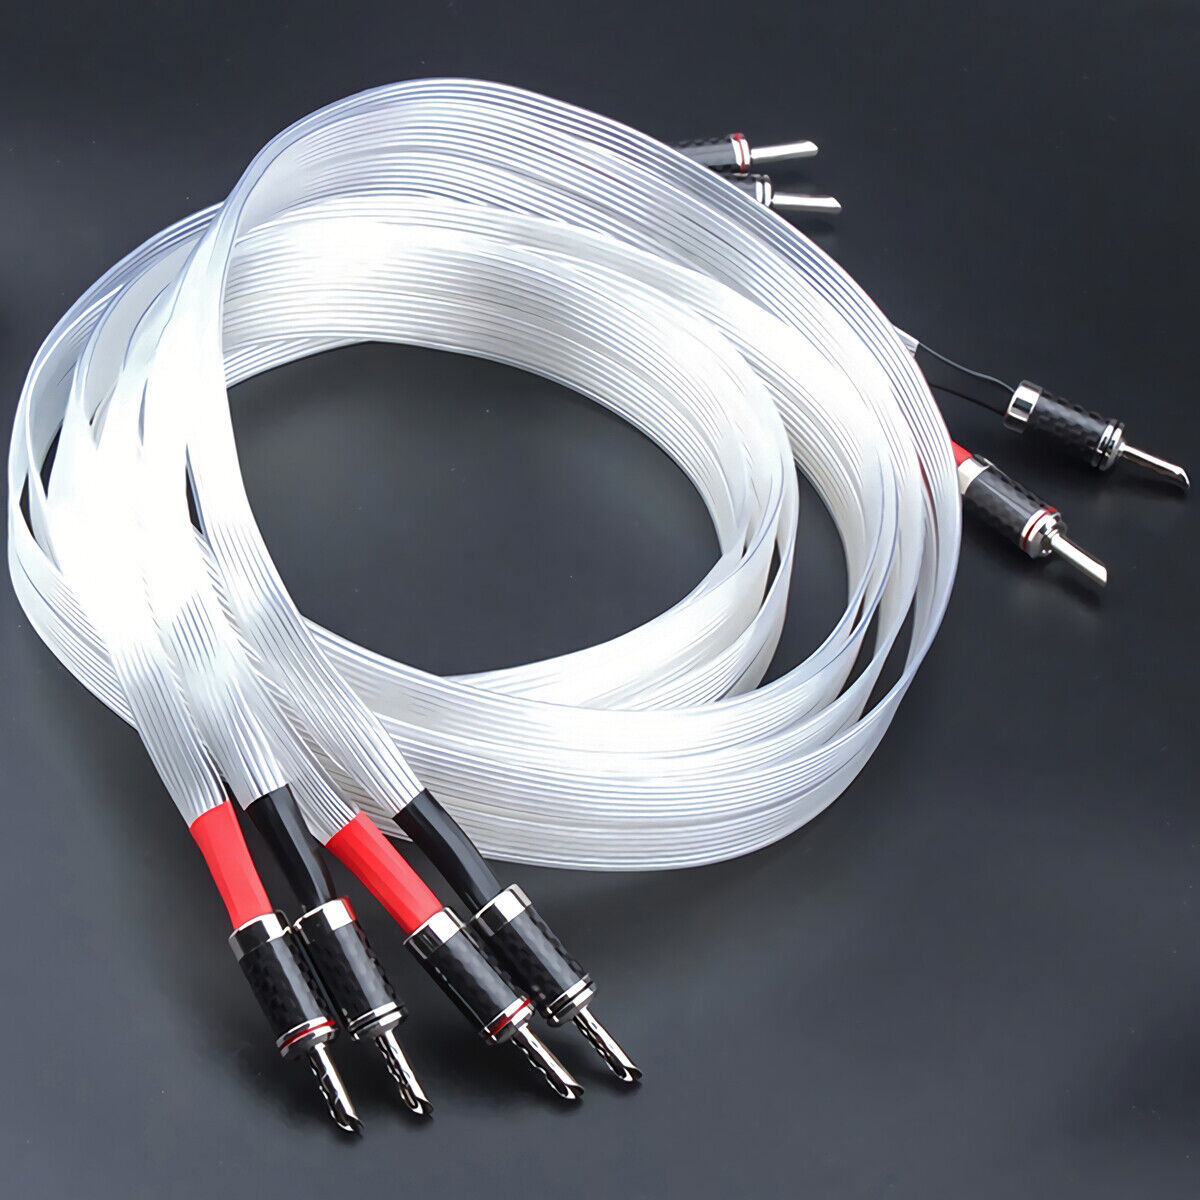 Pair Silver Plated Speaker Cable 7N OCC Cord with Rhodium Plated Banana Plugs